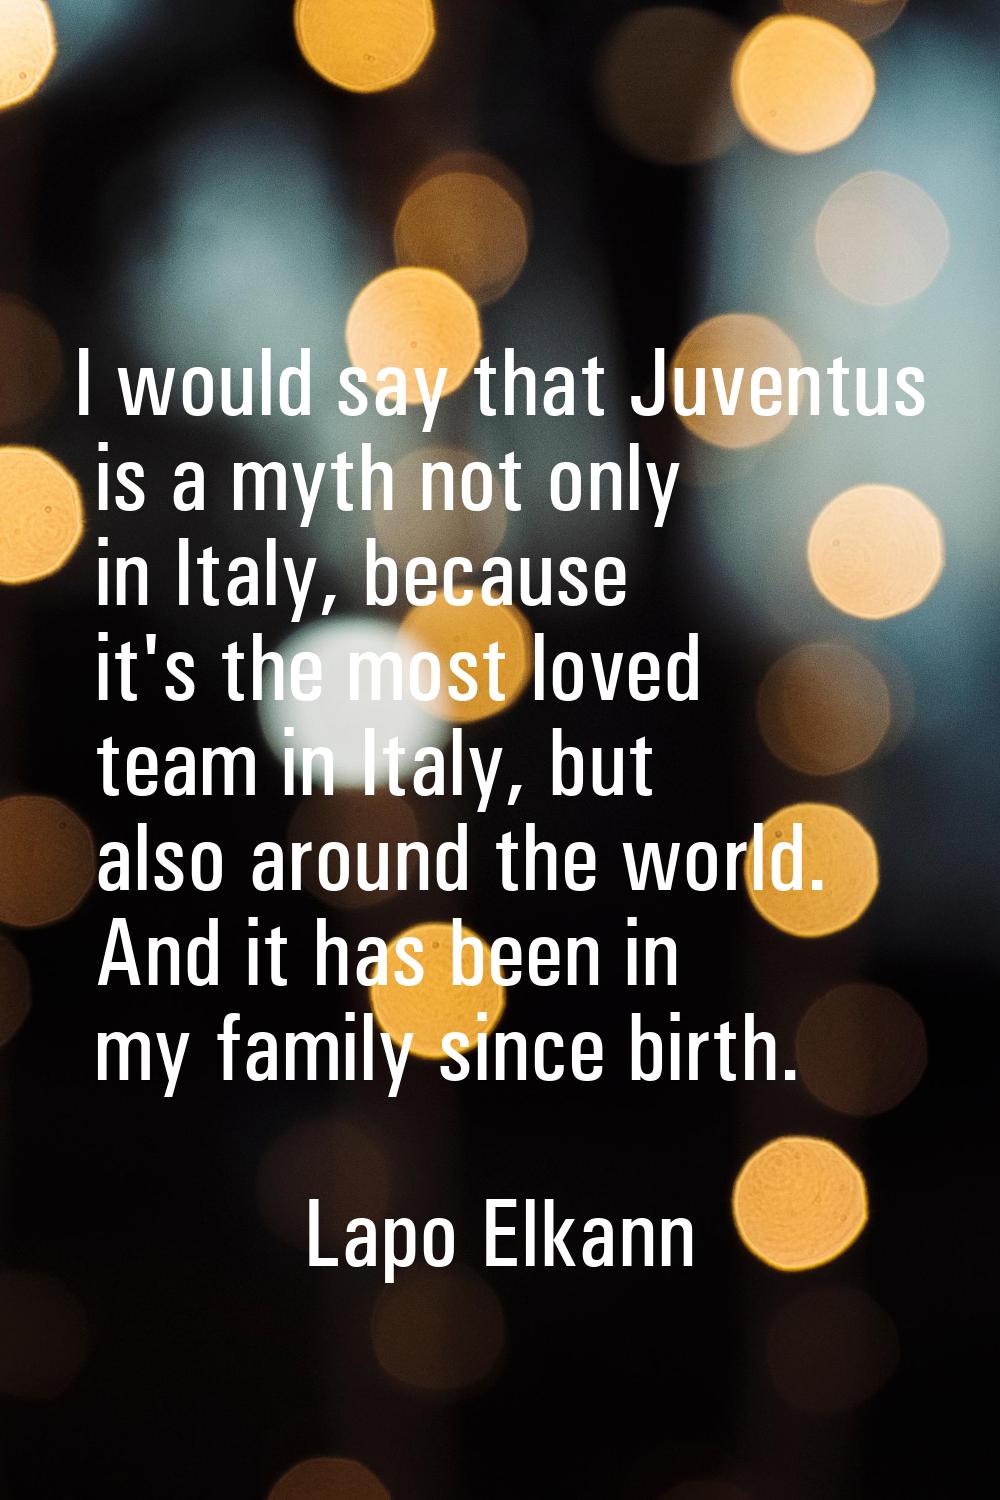 I would say that Juventus is a myth not only in Italy, because it's the most loved team in Italy, b